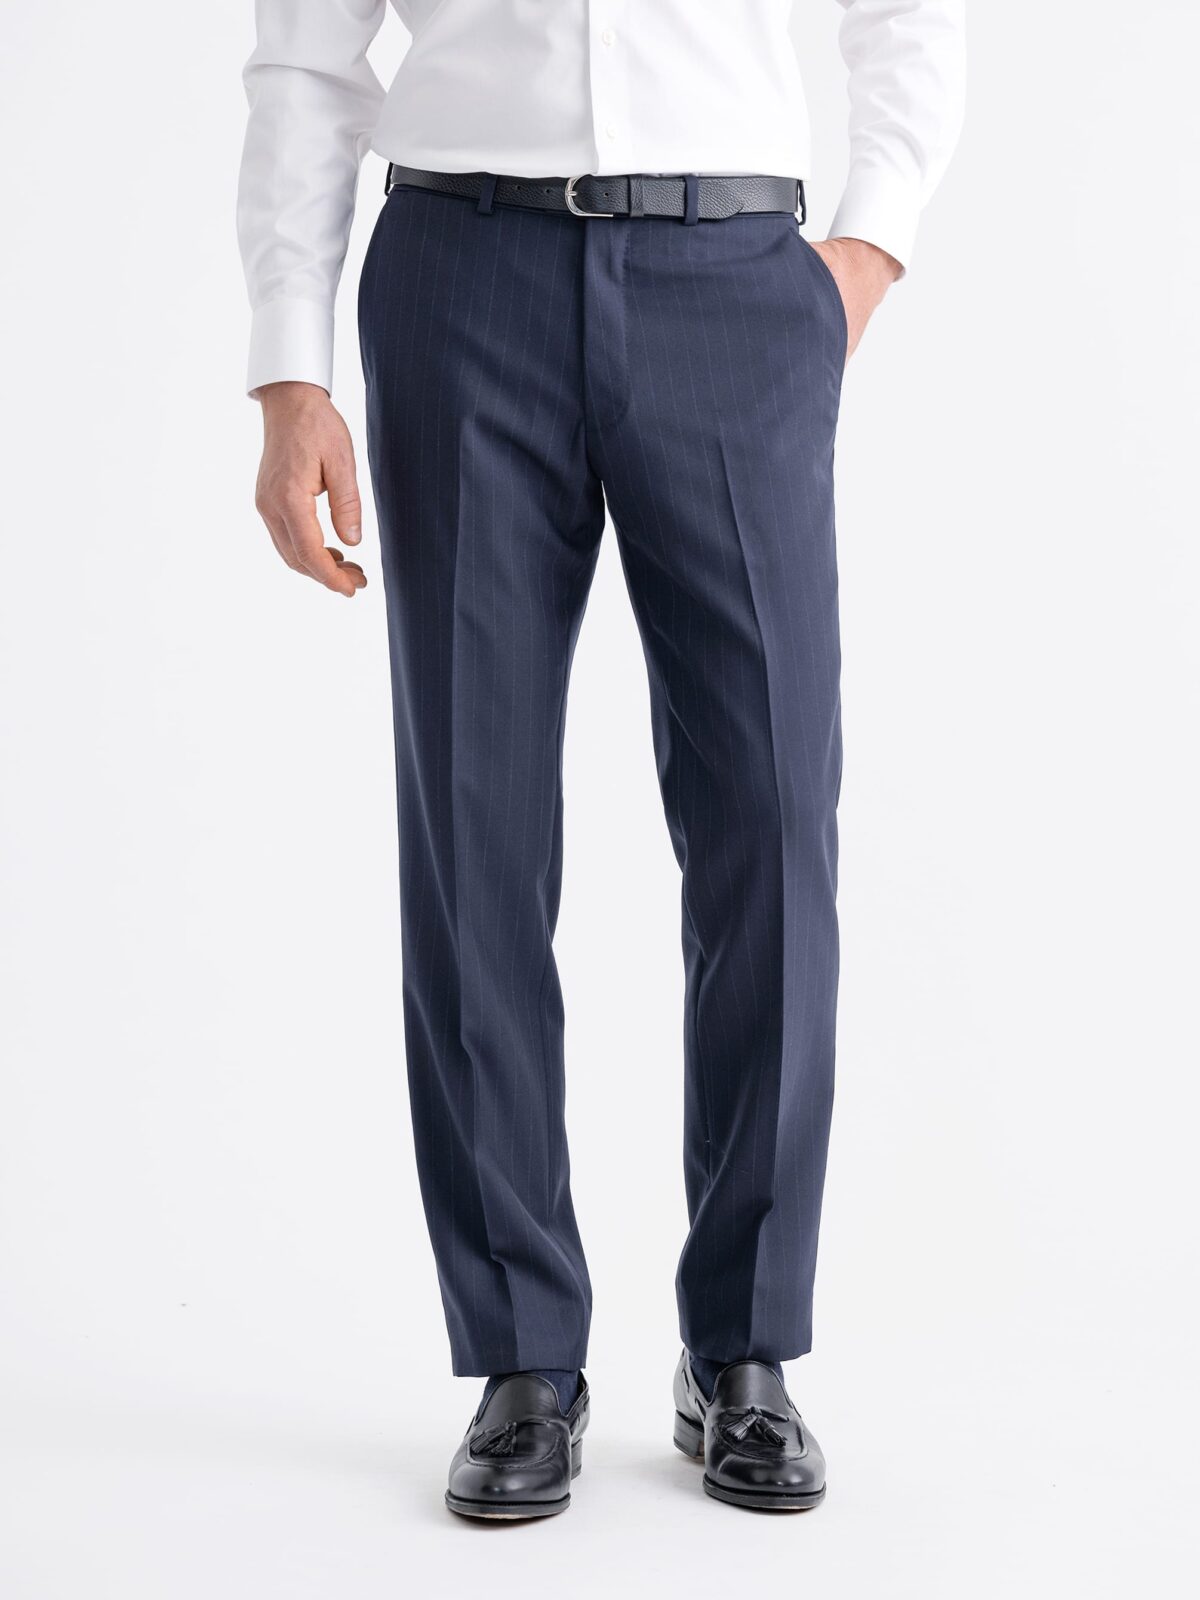 Buy CLITHS Cotton Trousers for Men Navy Blue/Formal Pants for Men Slim Fit  at Amazon.in